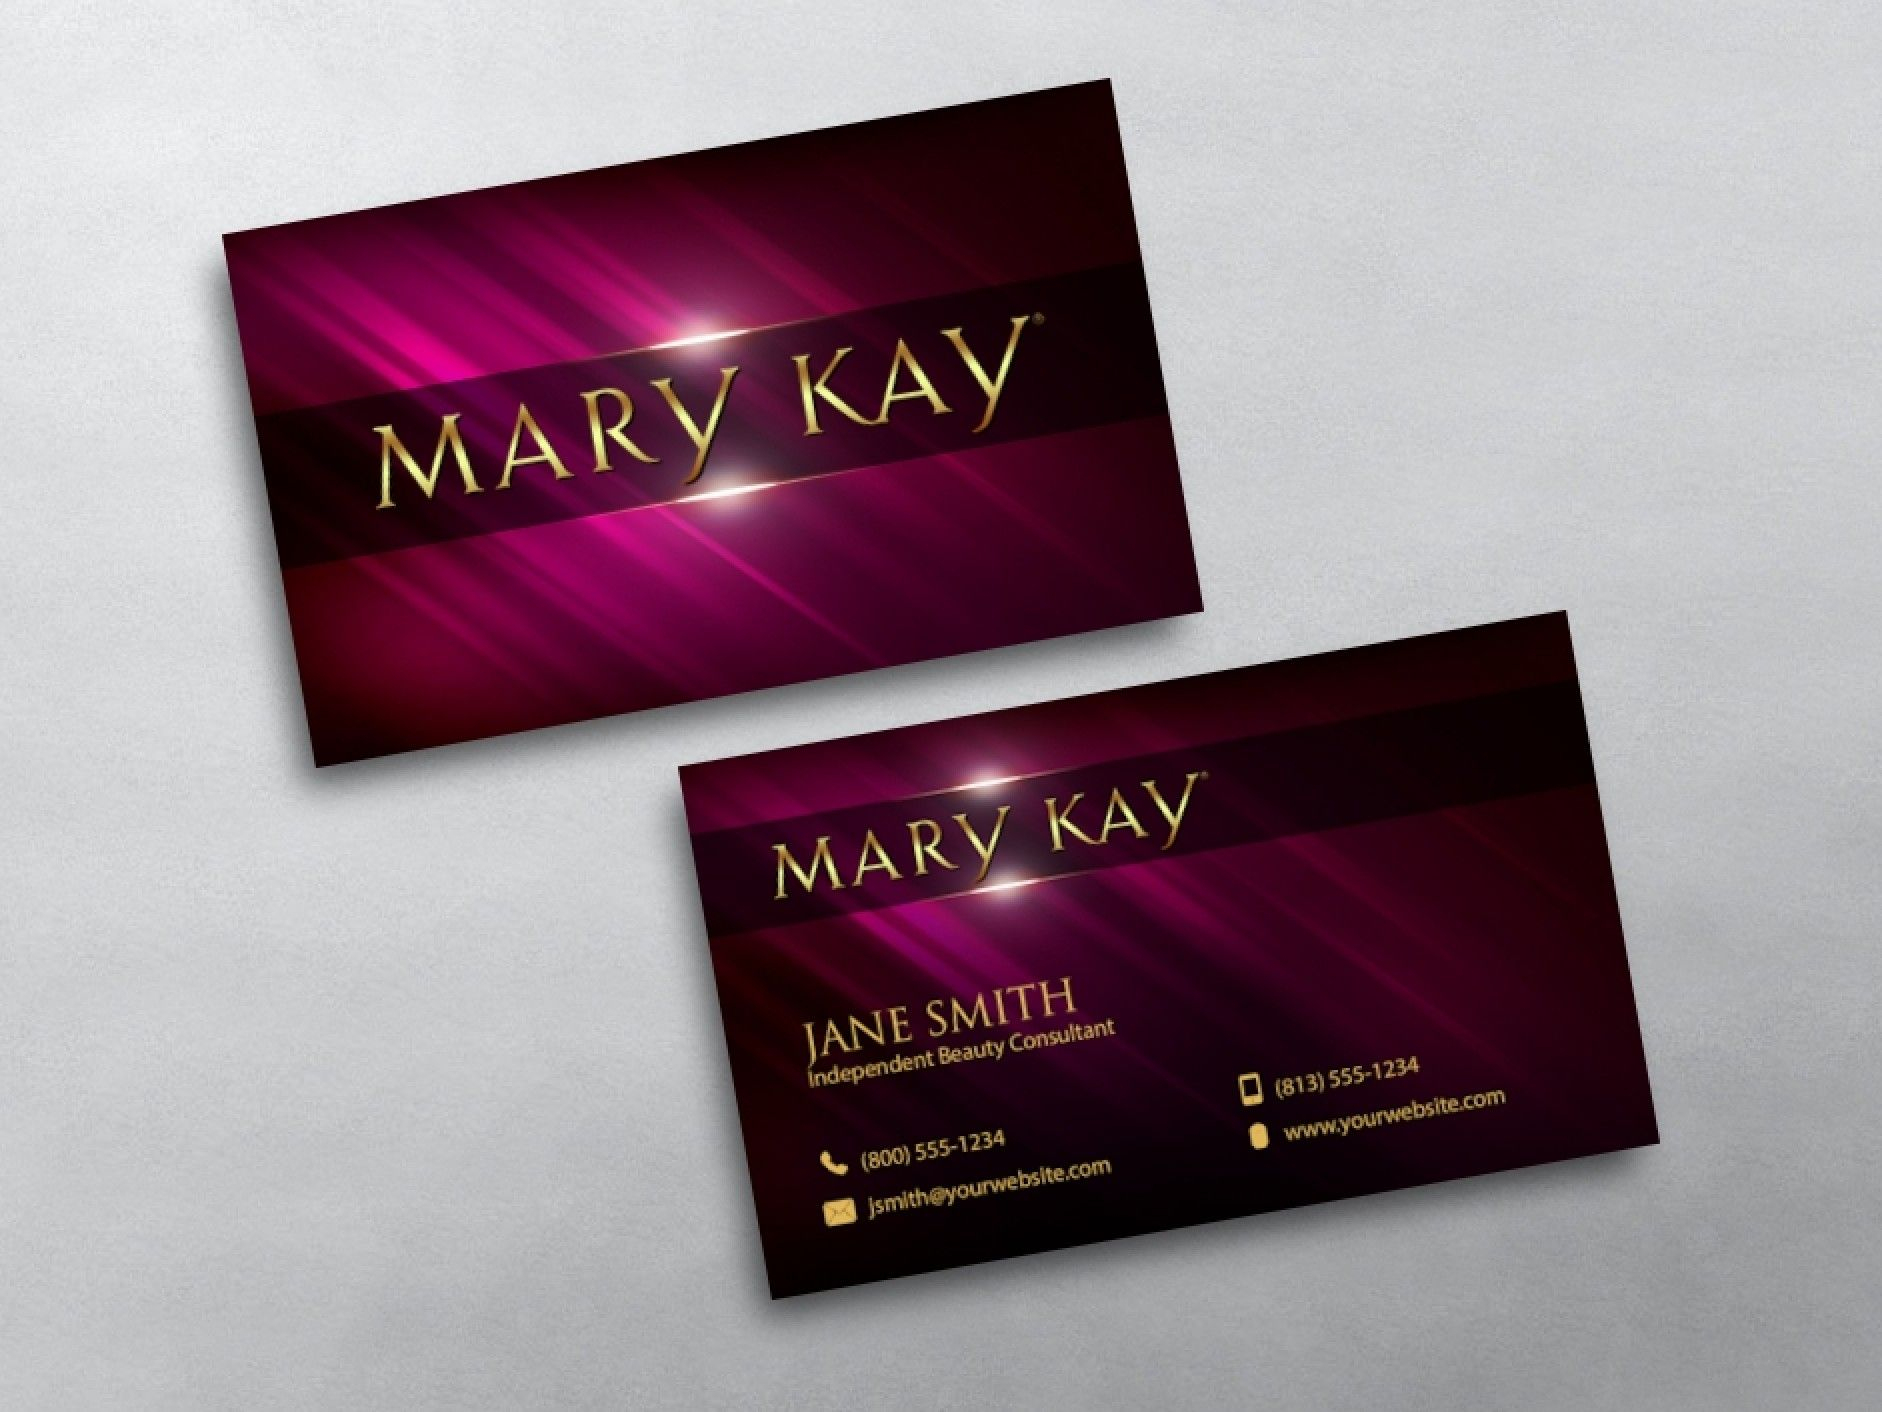 Mary Kay Business Cards In 2019 | Pink Dreams | Pinterest | Free - Free Printable Mary Kay Business Cards